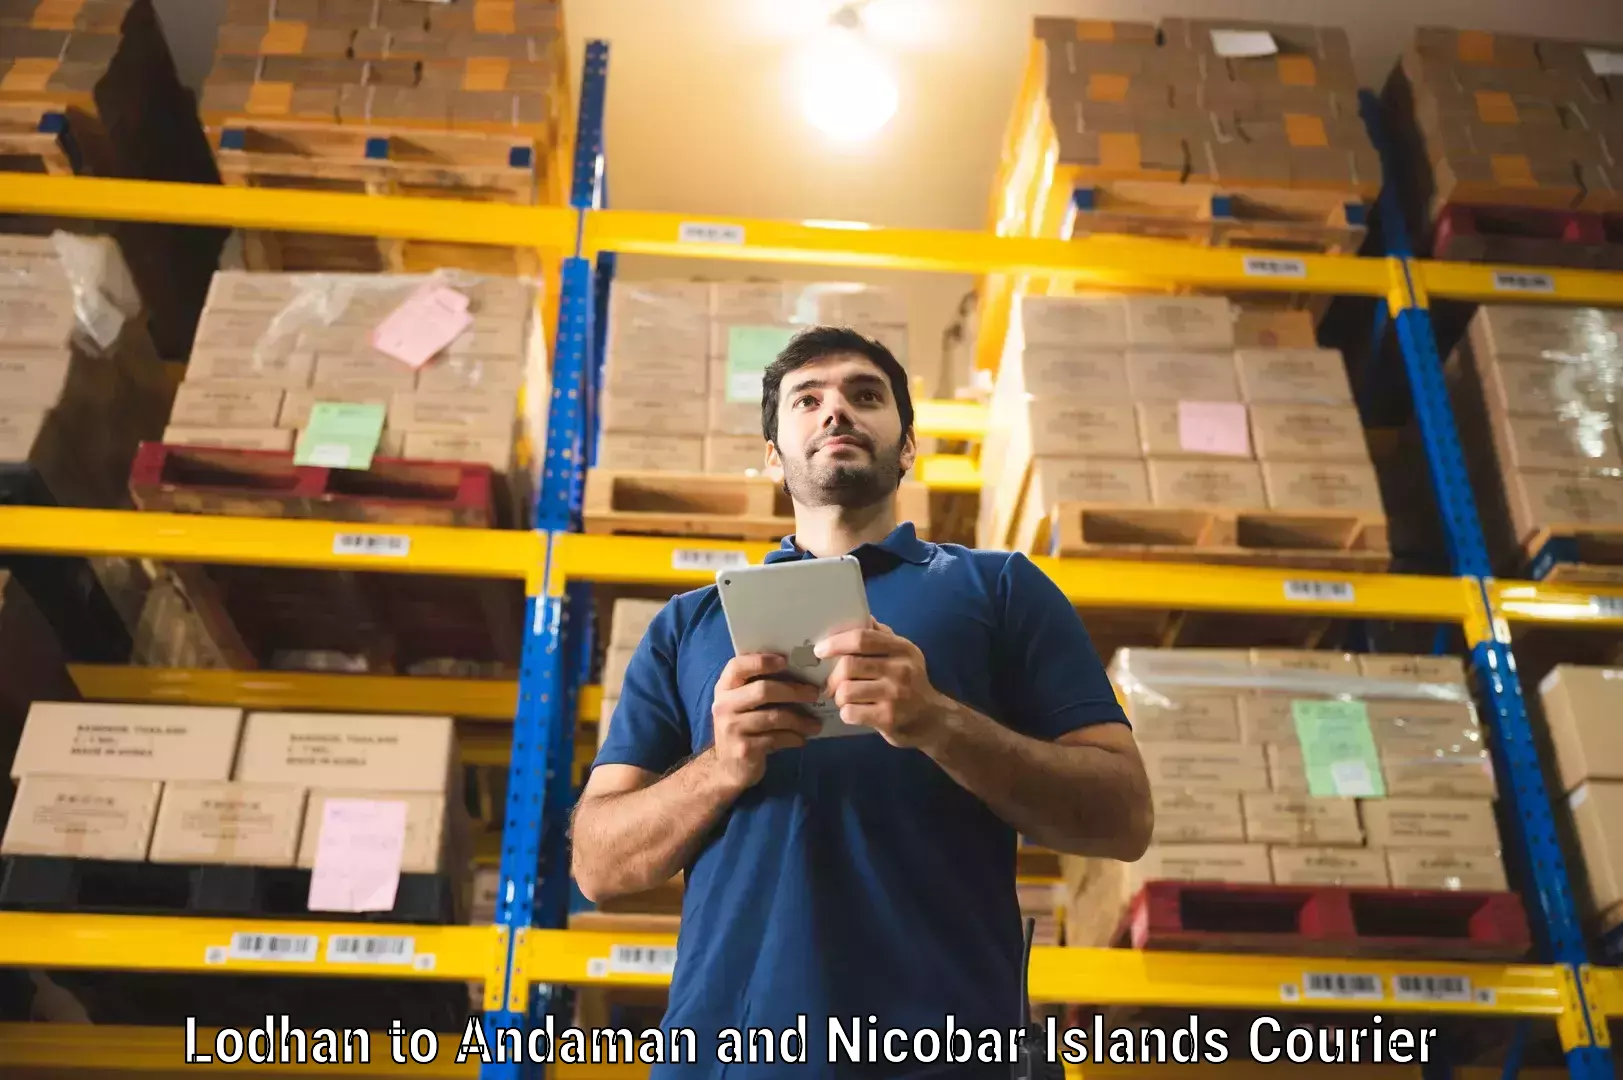 Customizable delivery plans Lodhan to Andaman and Nicobar Islands